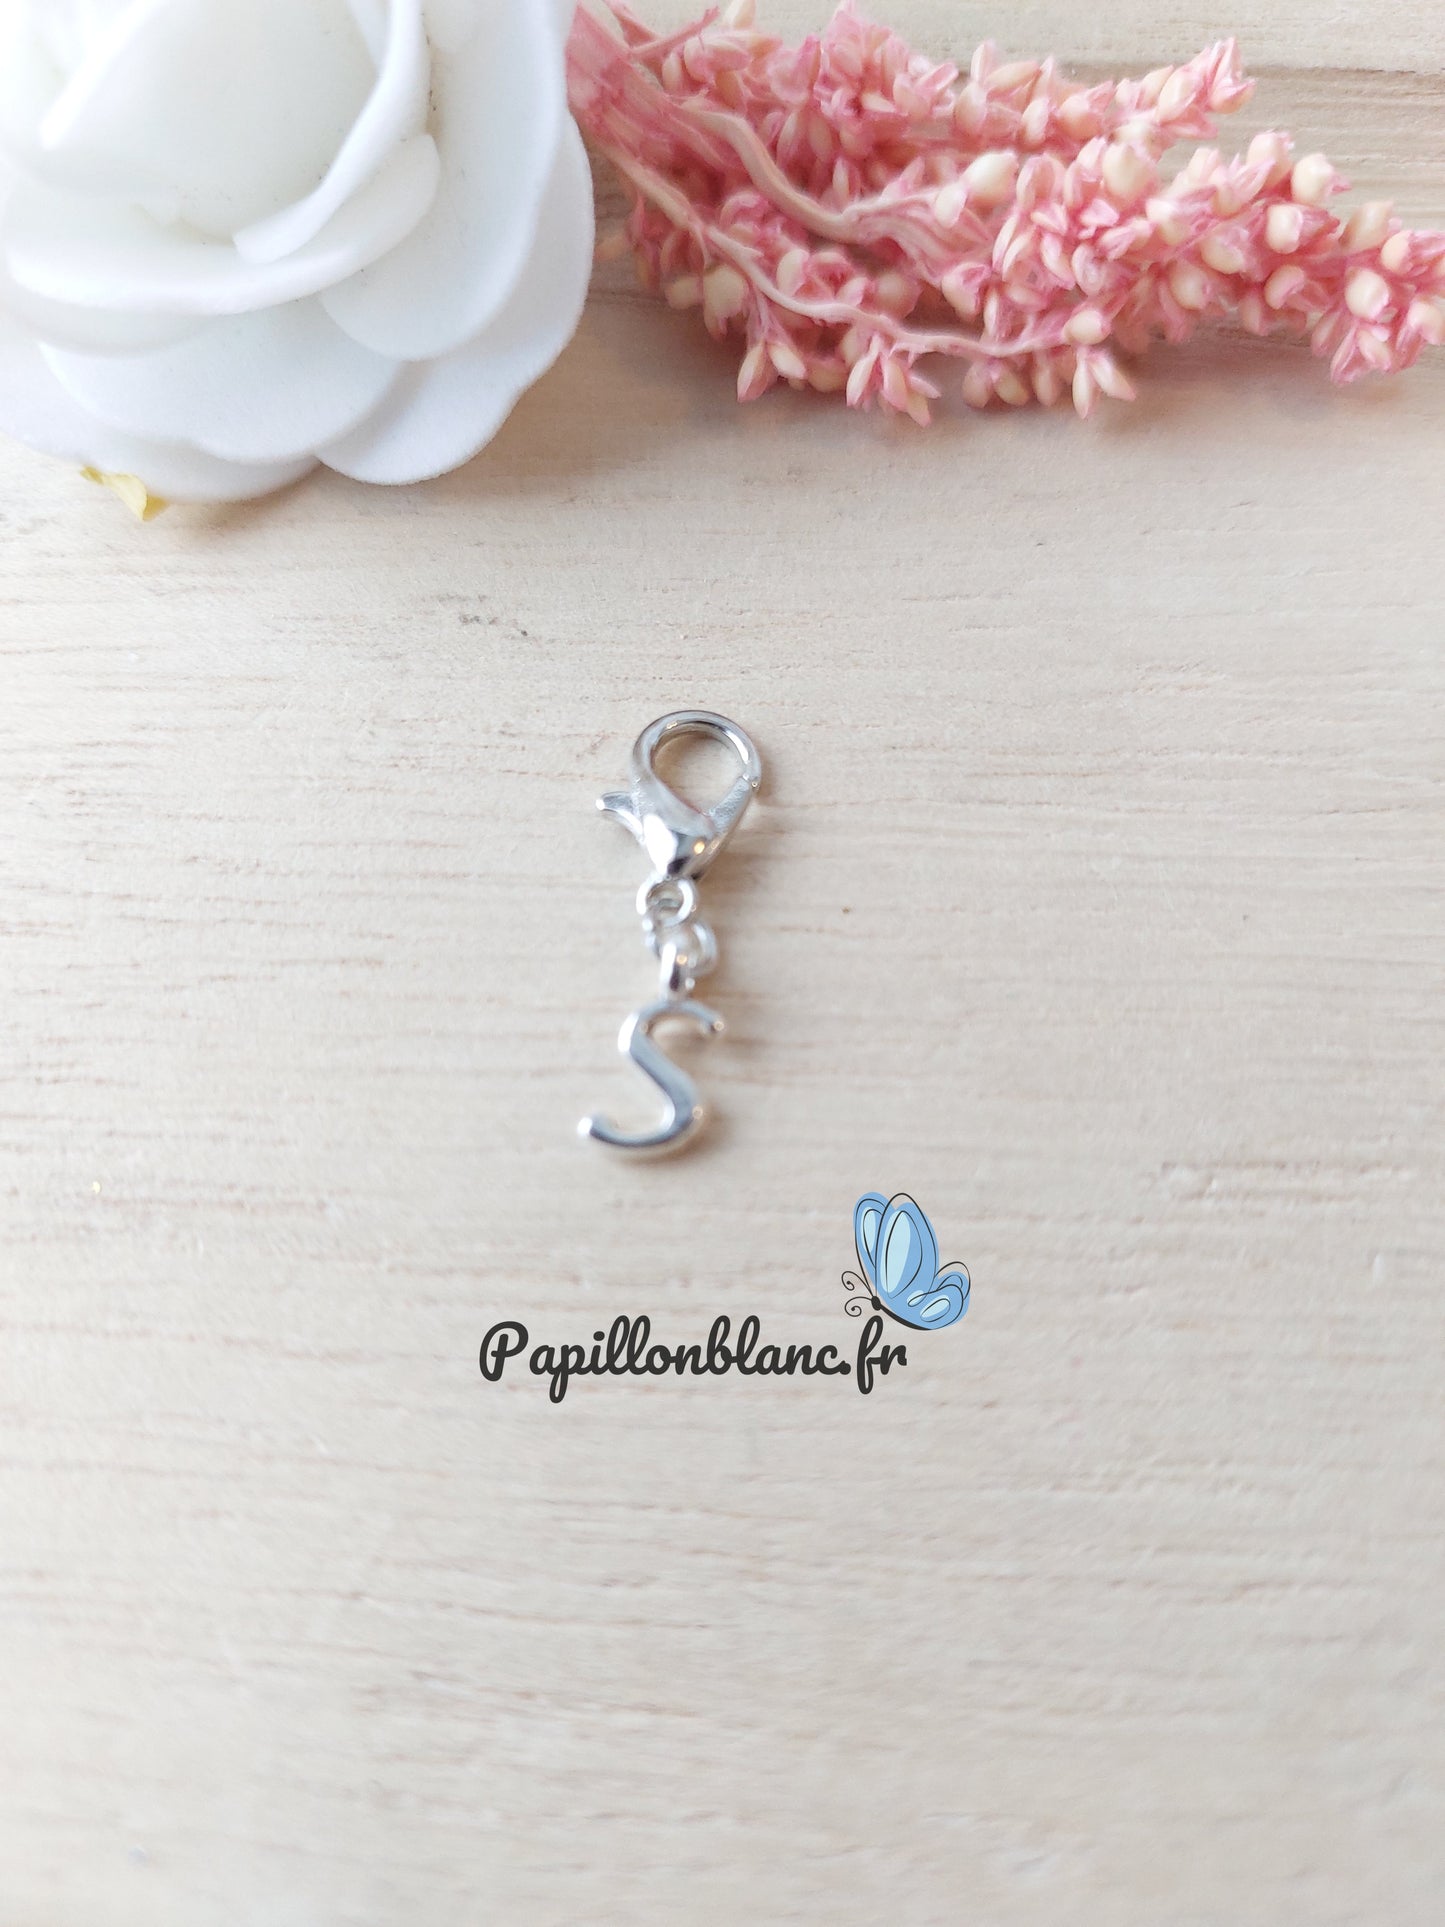 Charm Initiale